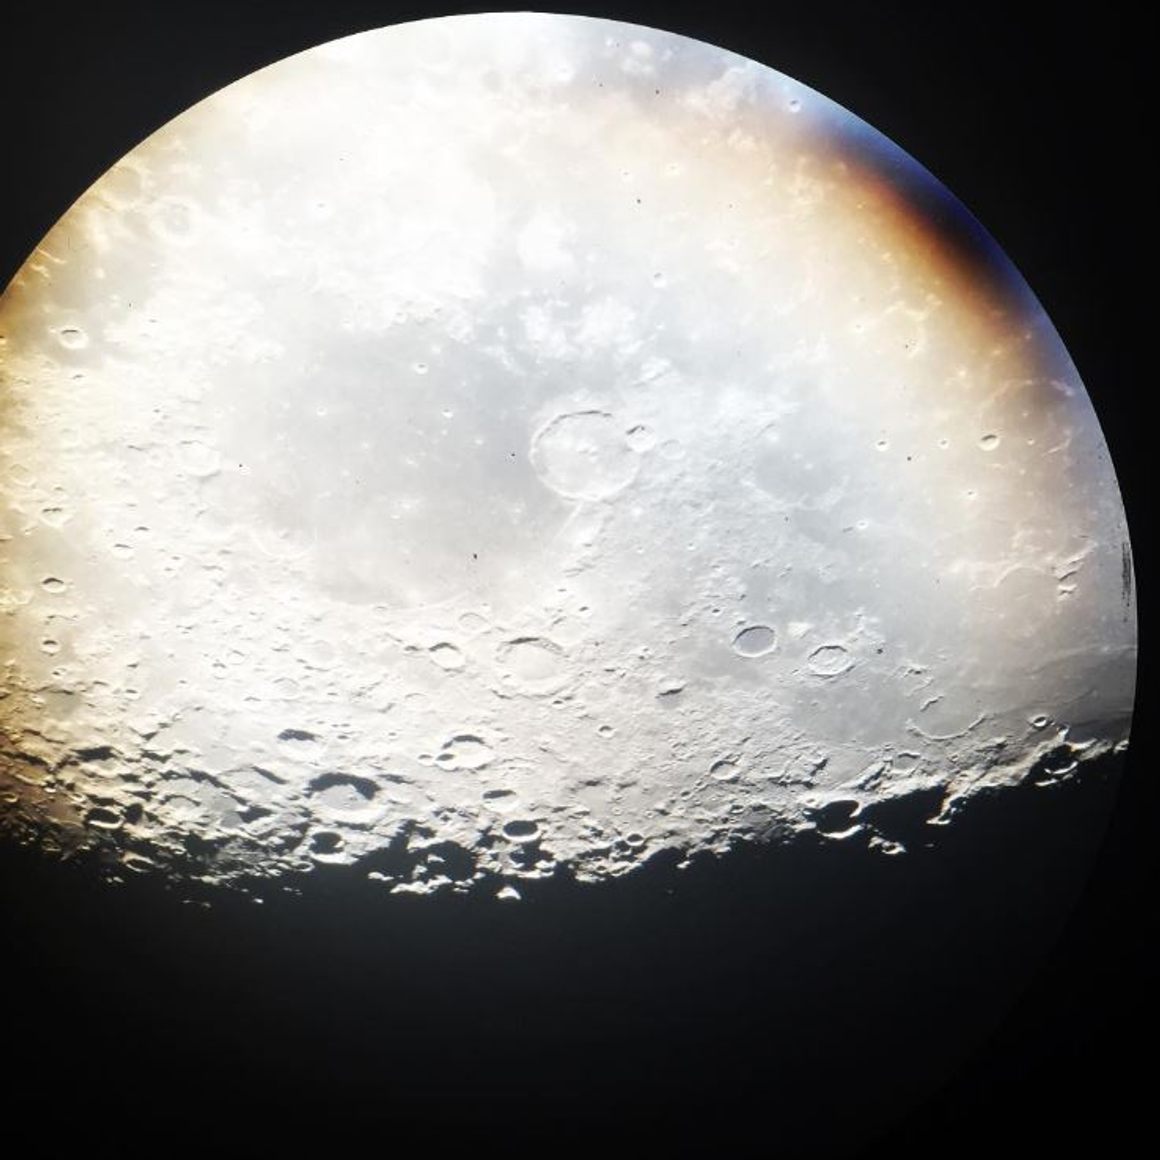 The moon shot with an iPhone through the 60-inch telescope.